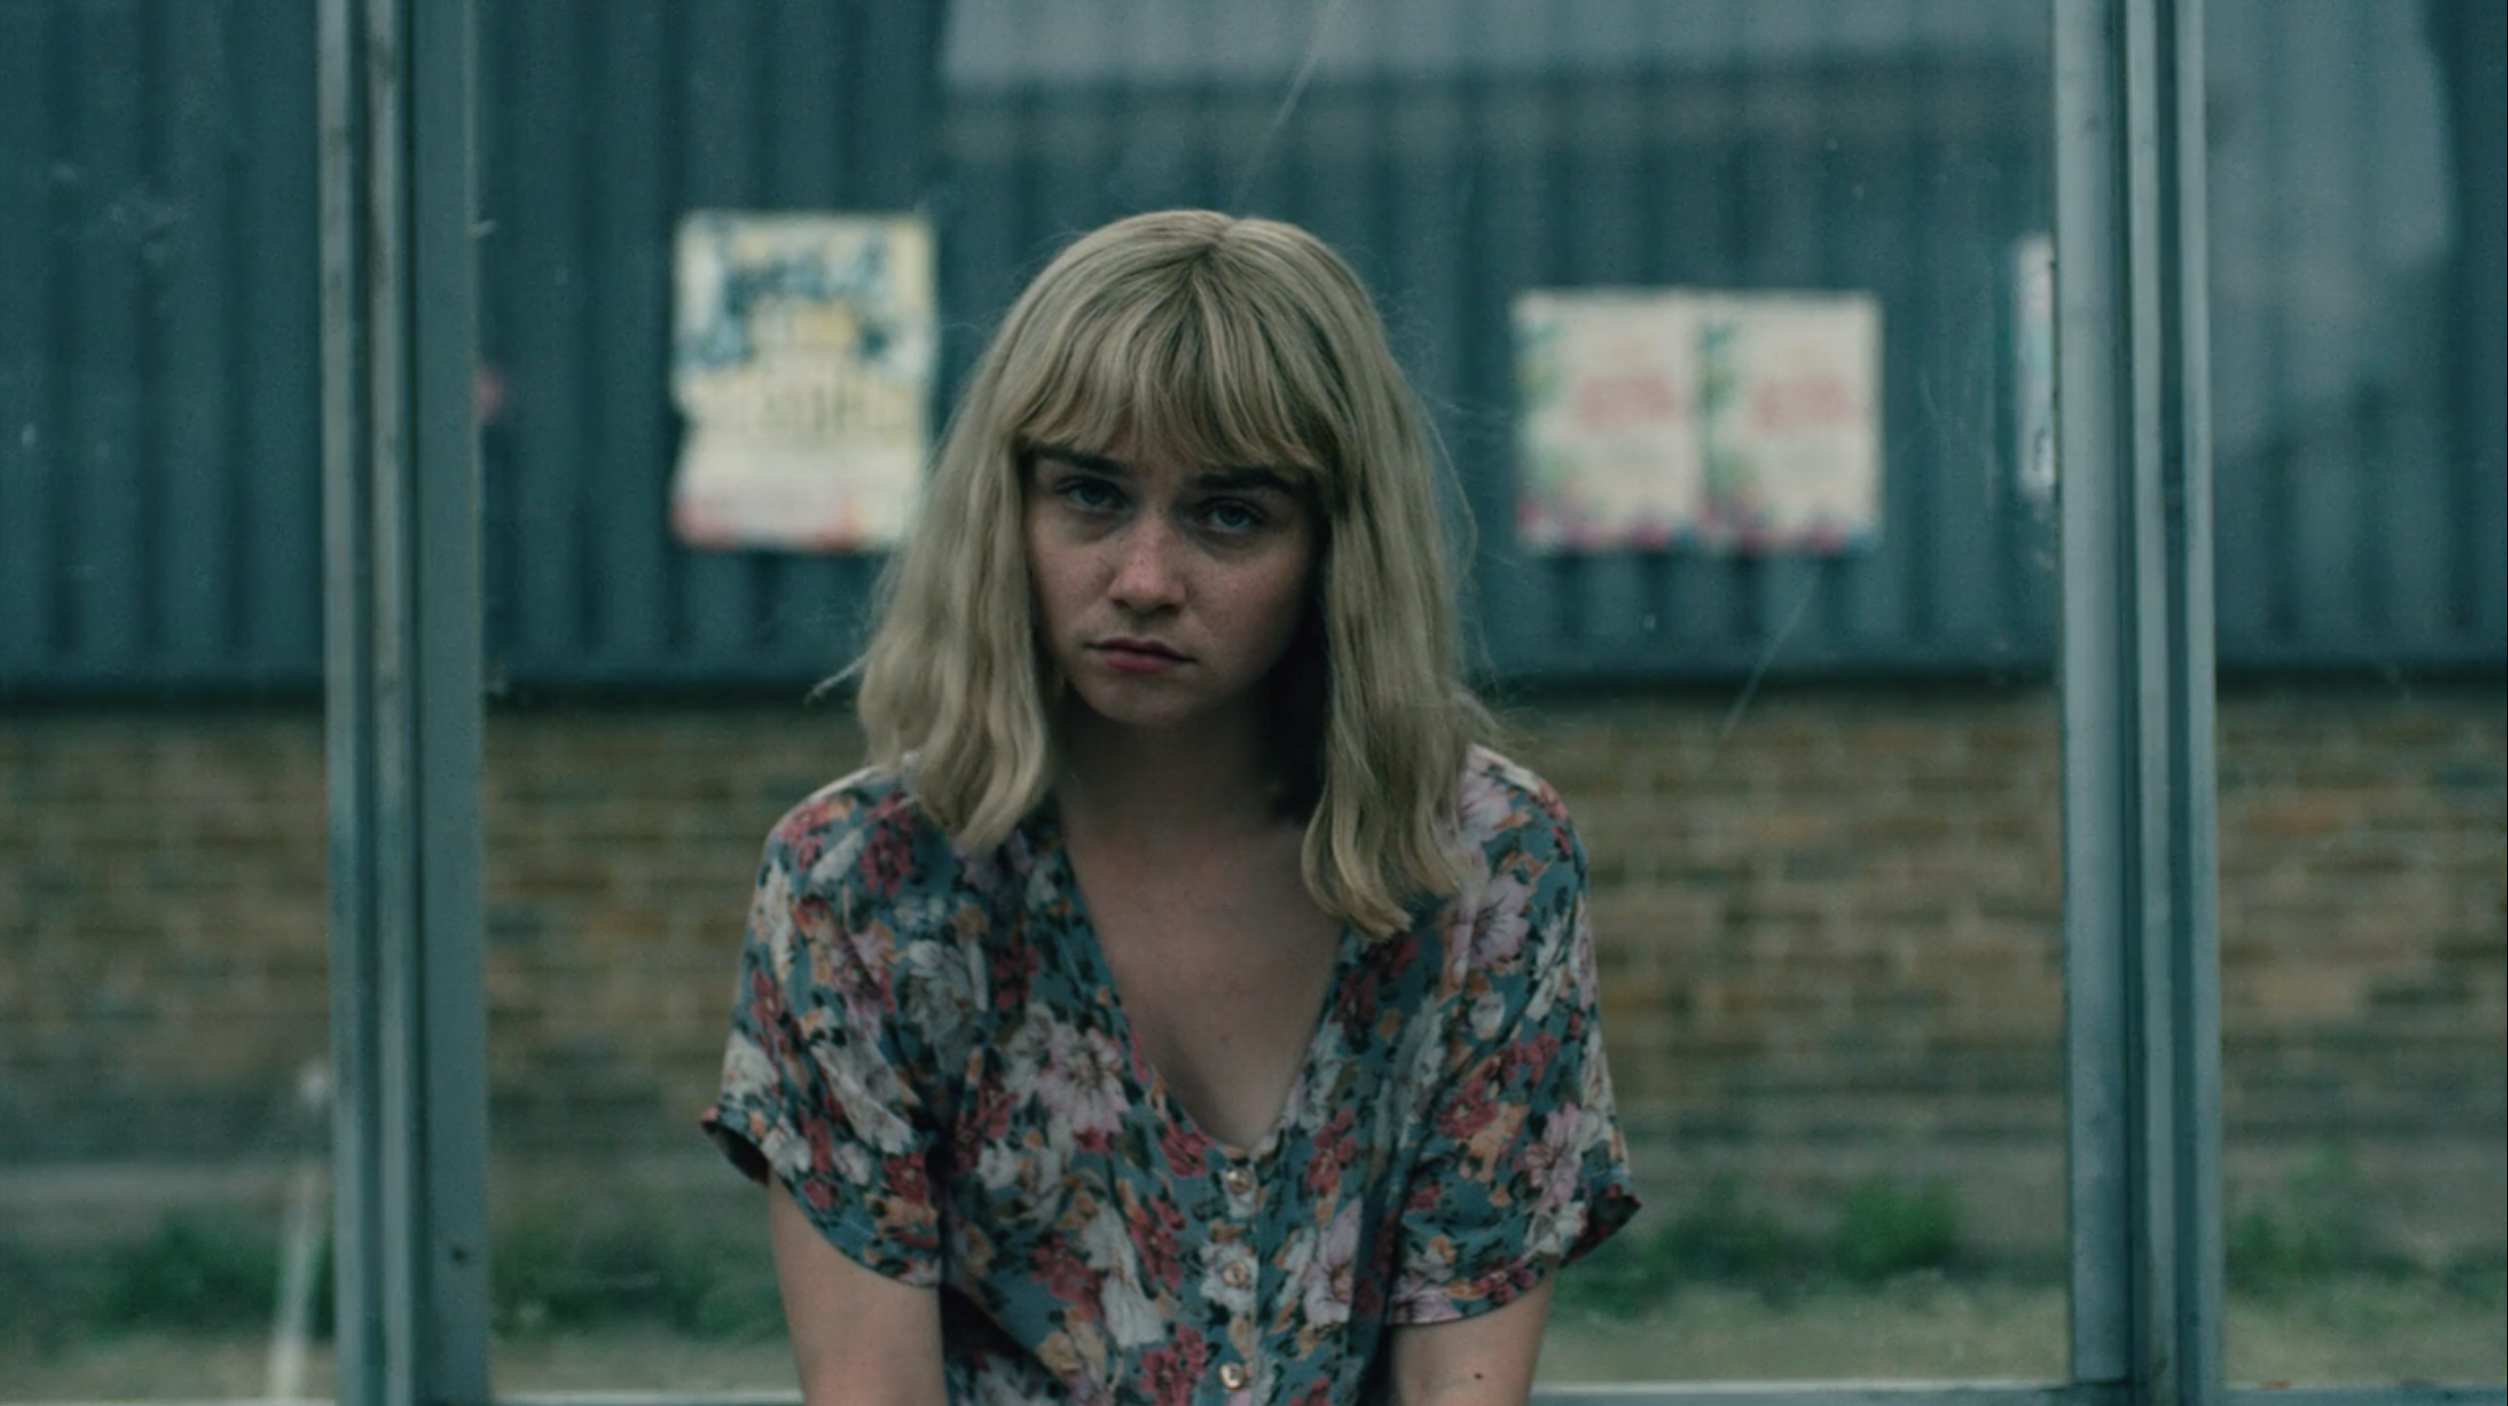 Frame By Frame: The End of the F***ing World (2017). 